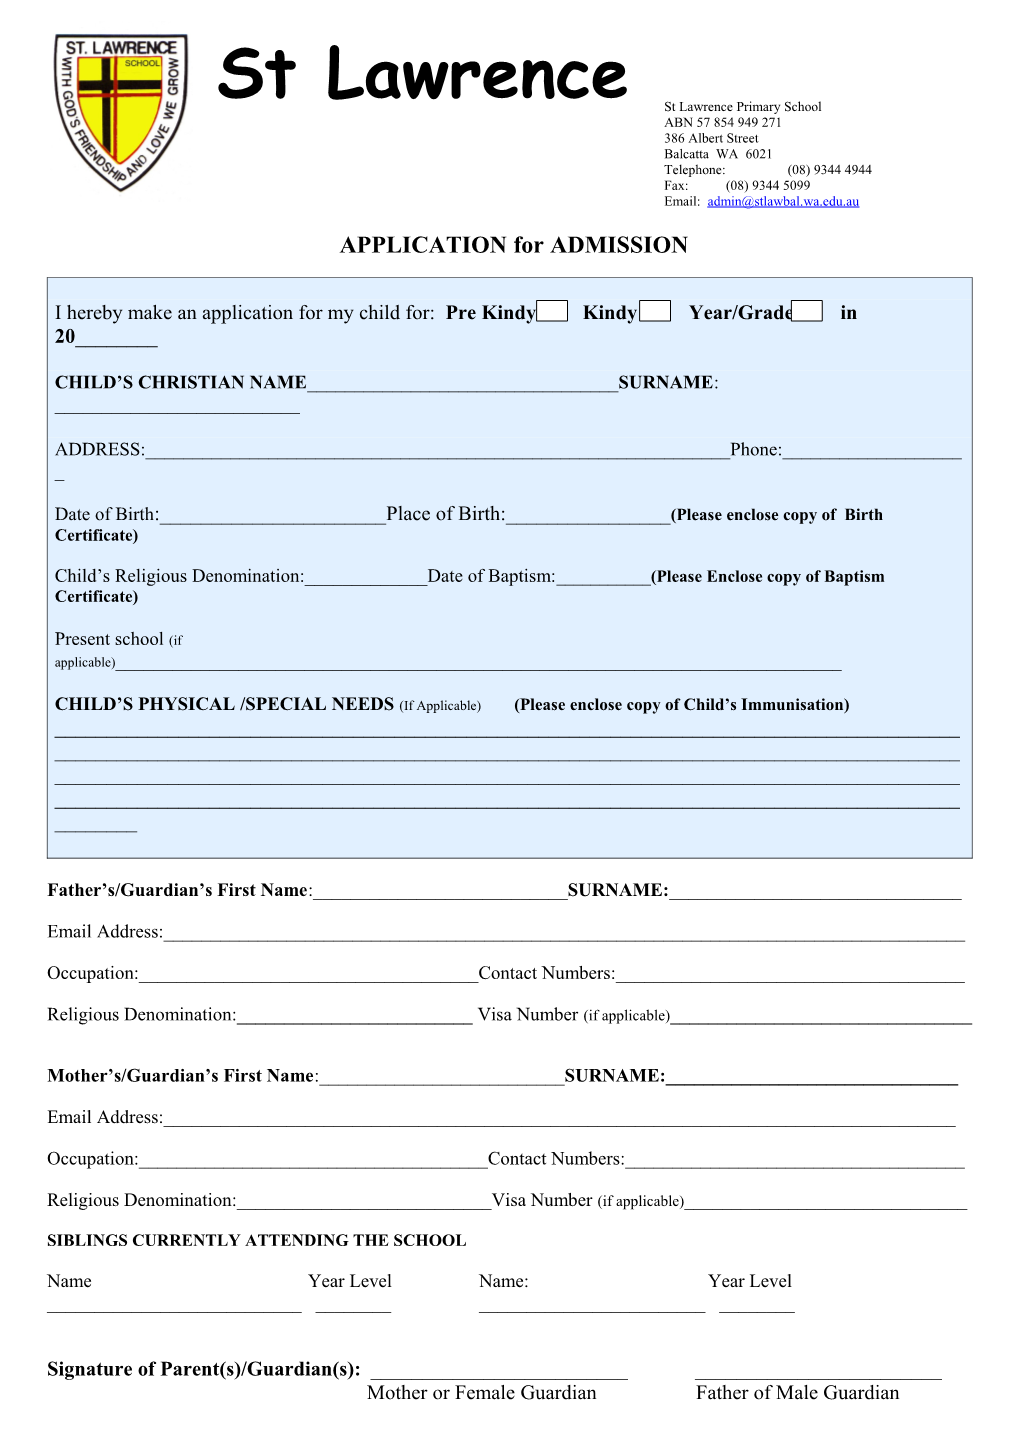 APPLICATION for ADMISSION s4